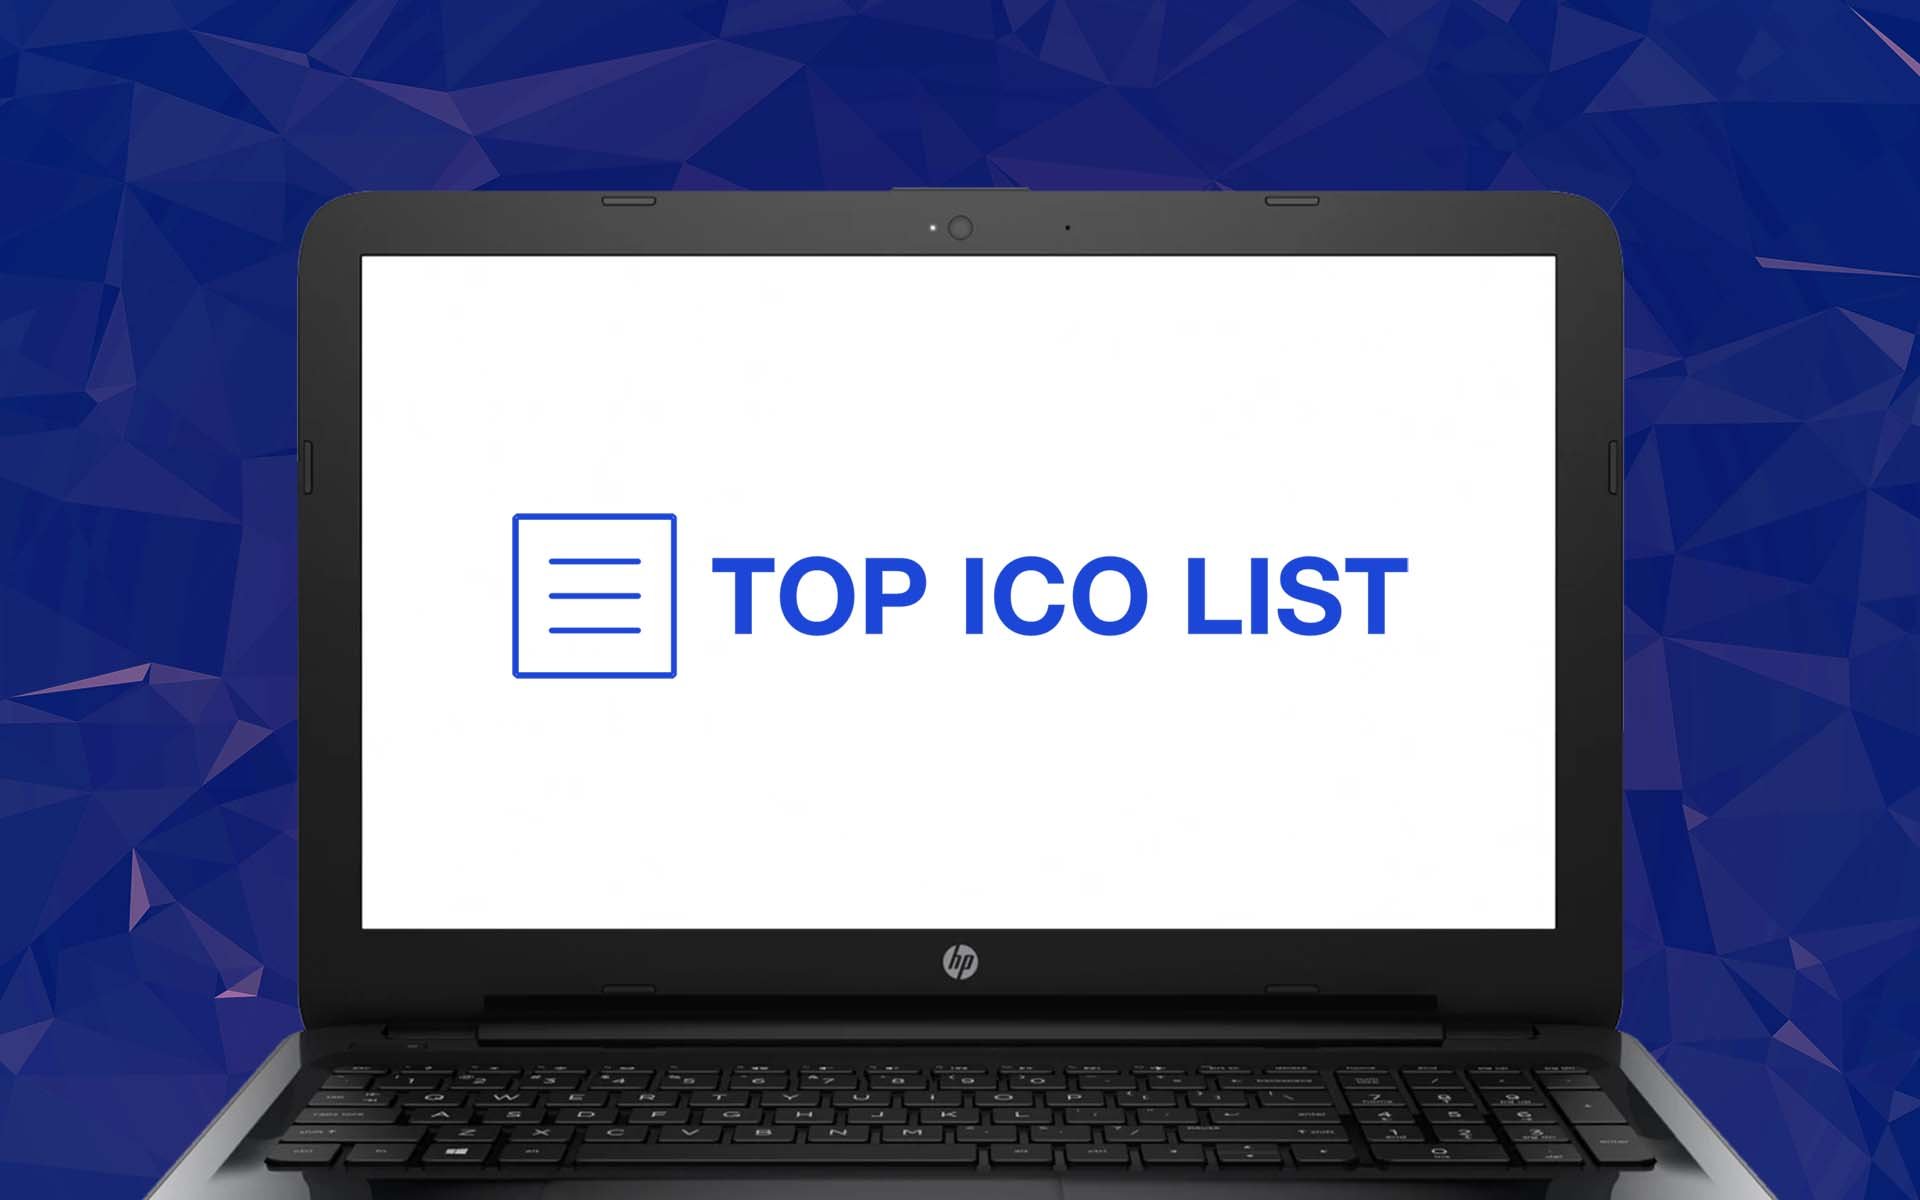 Top ICO List Helps Investors Stay Up to Date on ICOs ...